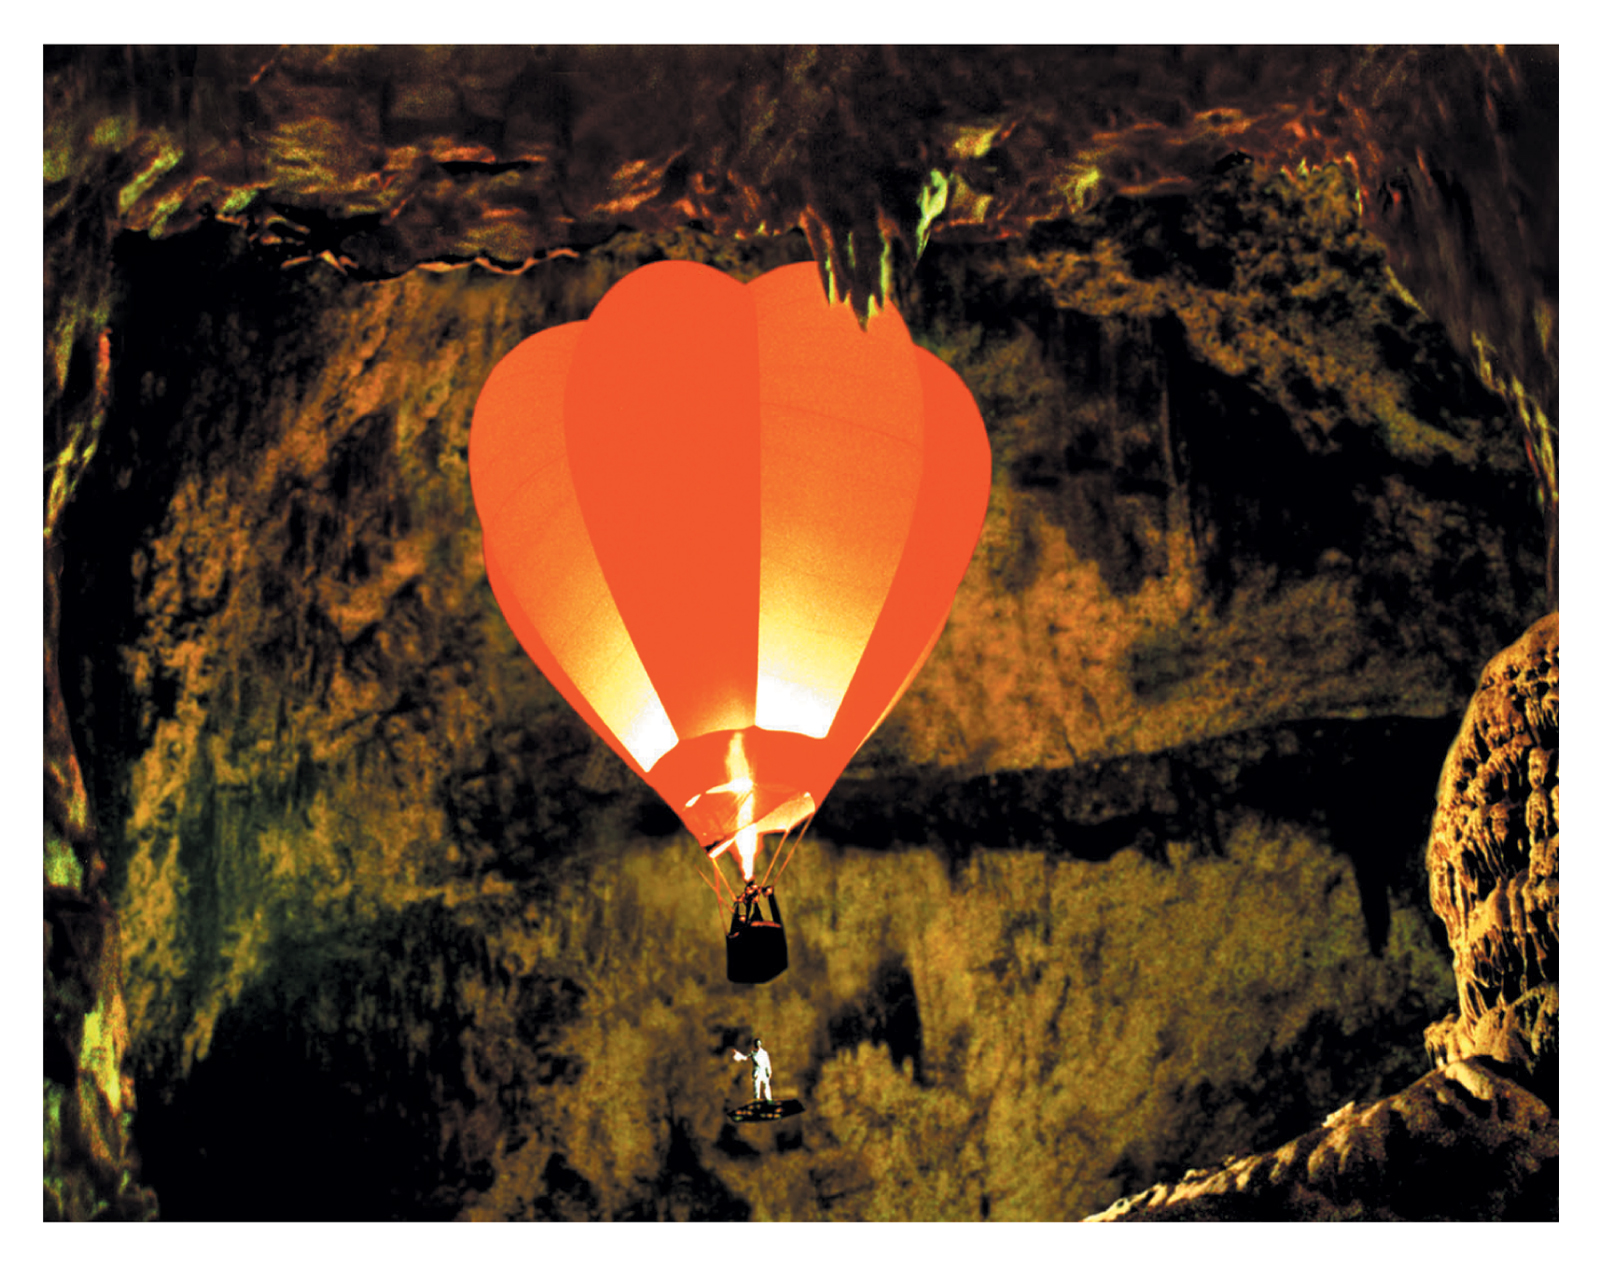 A 2001 postcard by artist Vadim Fishkin entitled “Hot air ballooning in a cave.”